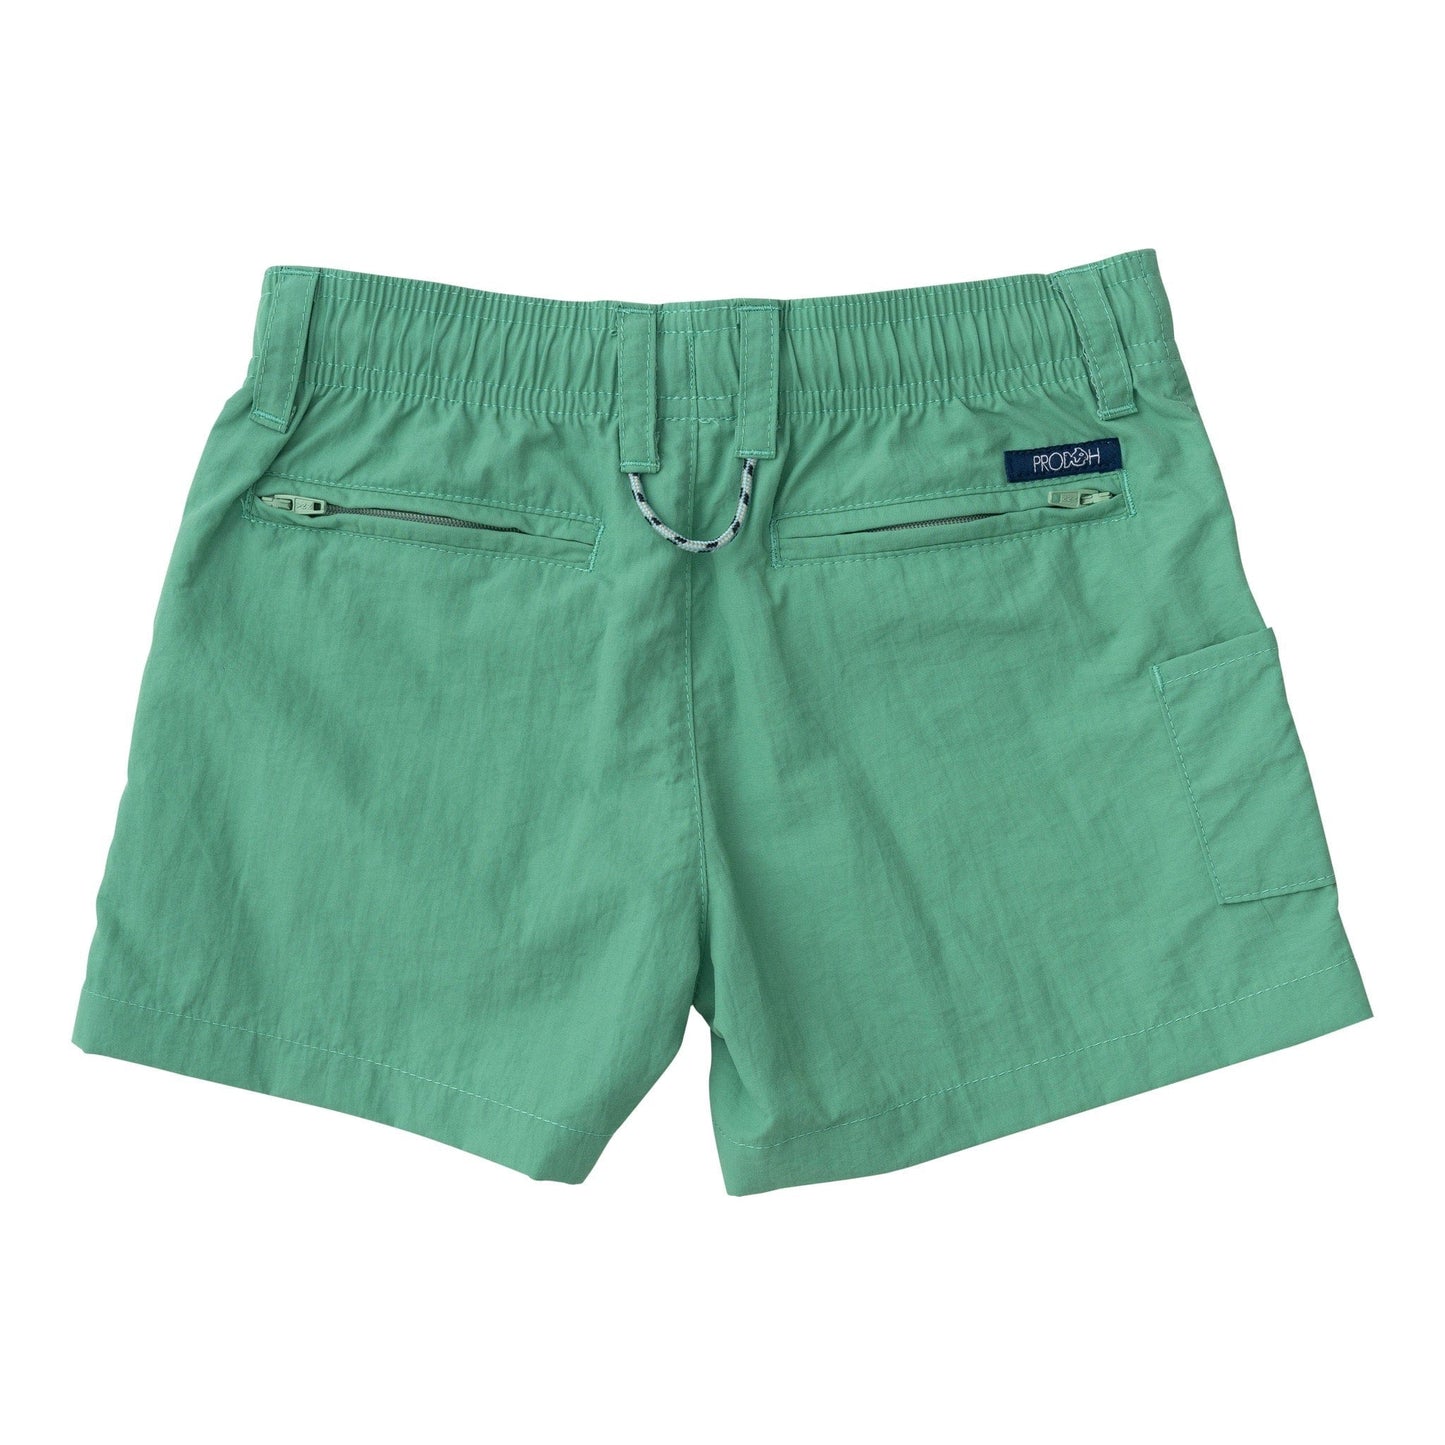 Outrigger Performance Short, Green Spruce